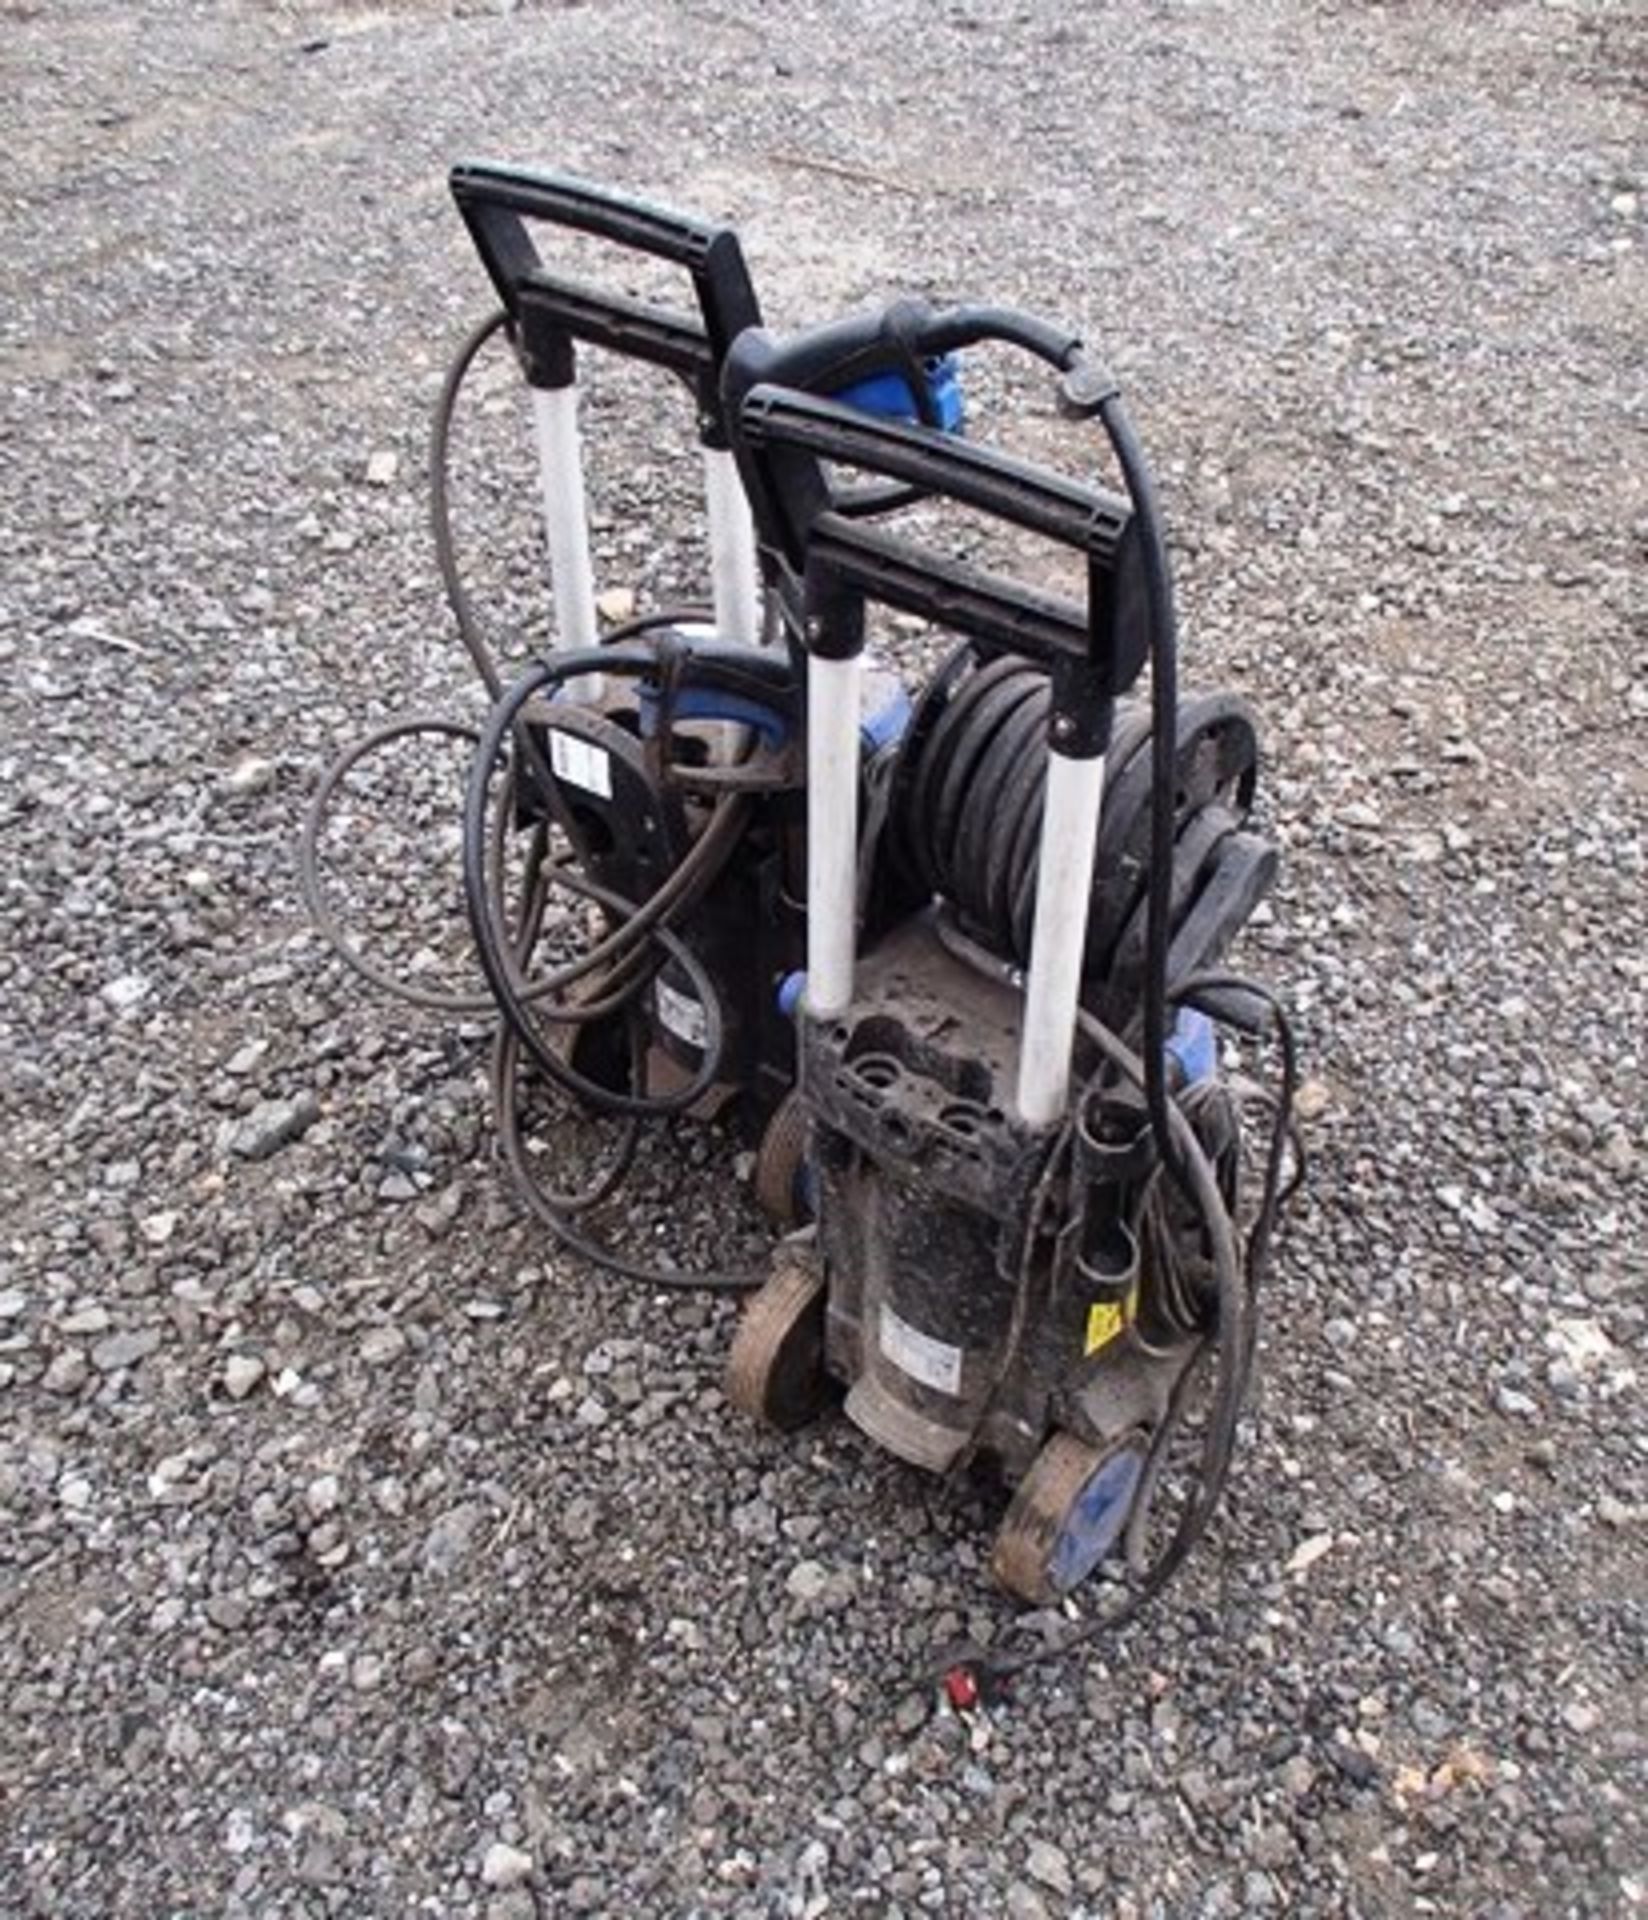 2 X NILFISK E130.2 PRESSURE WASHERS FOR SPARES OR REPAIR - Image 2 of 2